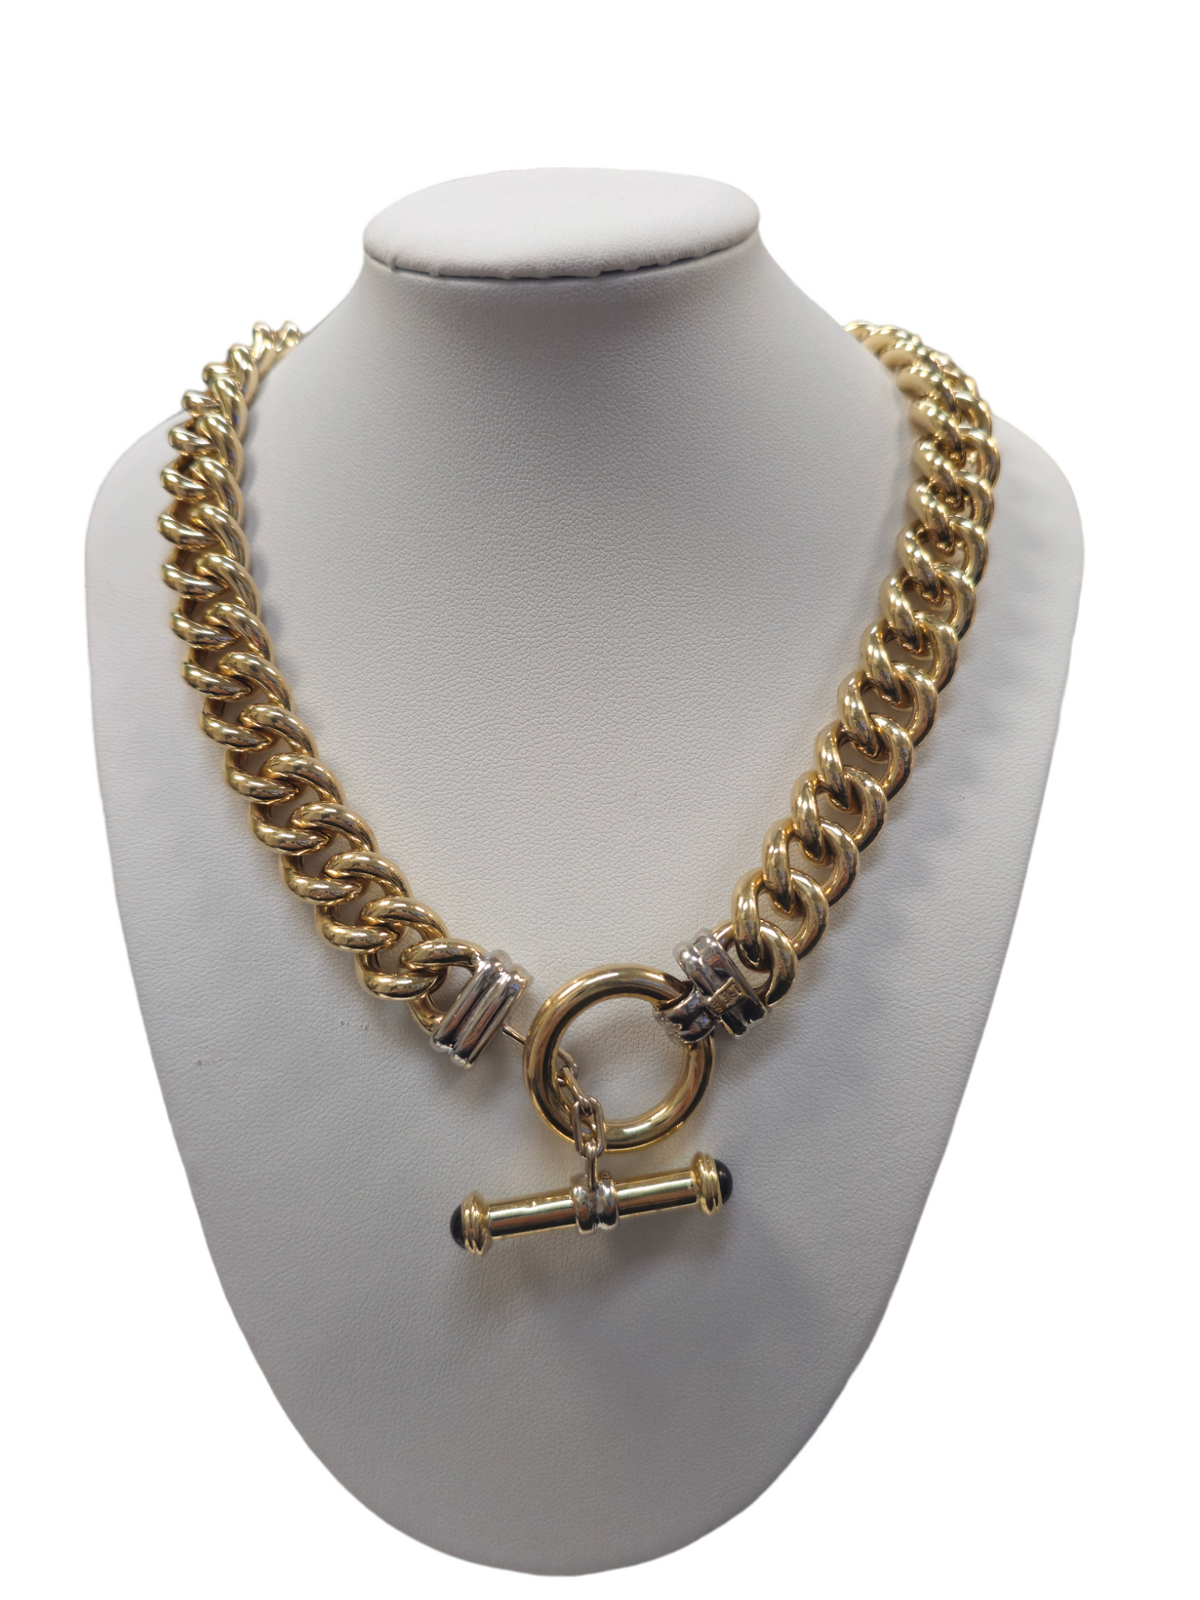 Hollow Rounded Curb Link necklace with toggle clasp in solid 14-karat yellow & white gold